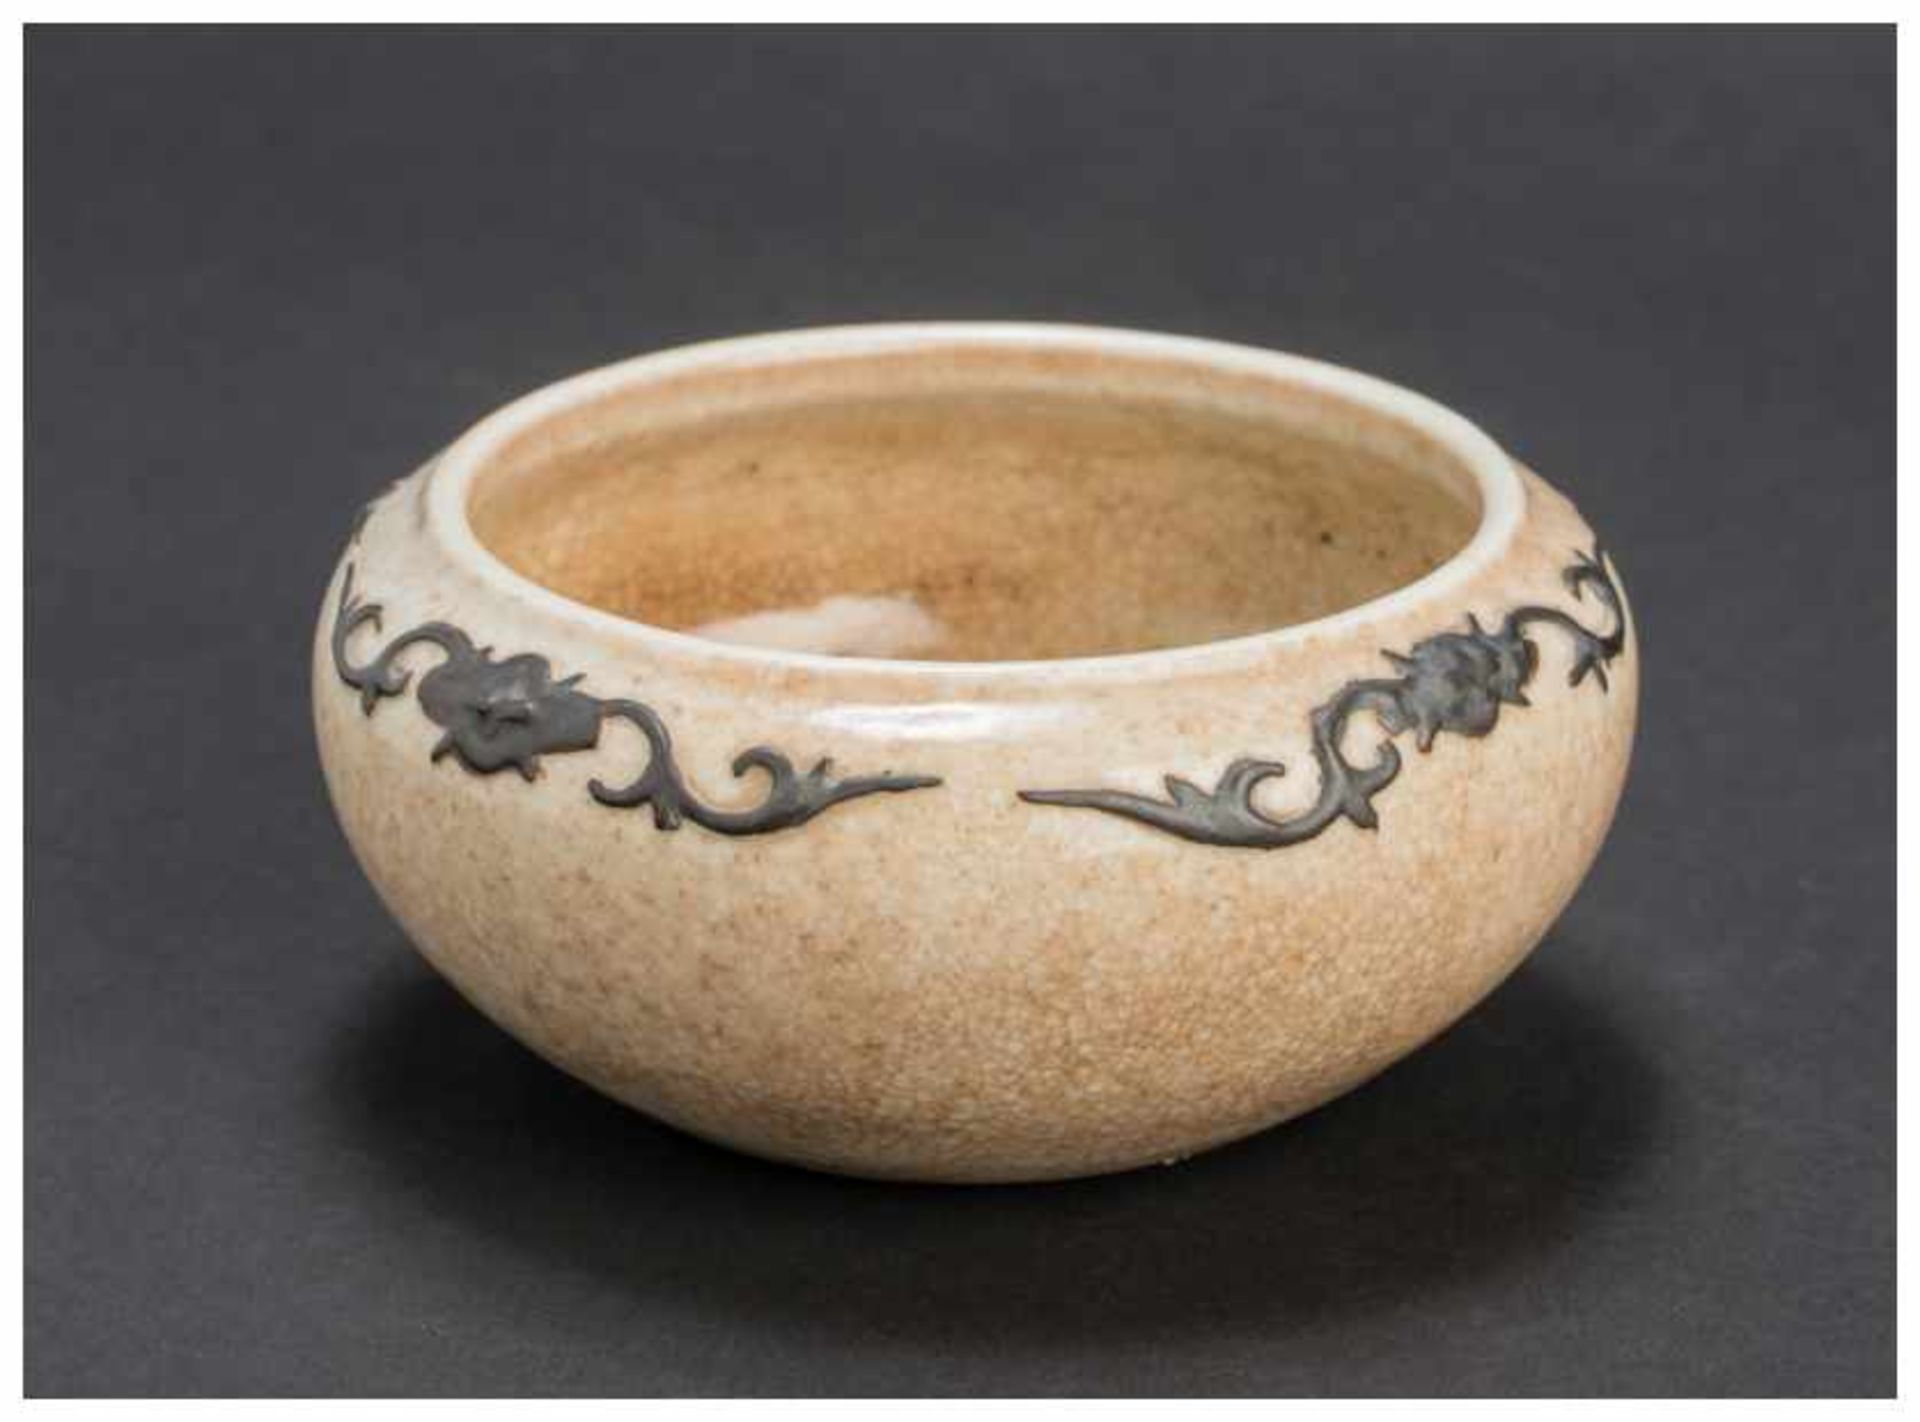 A CHINESE STONEWARE BOWL Stoneware. China, Qing dynasty, 19th centuryThis bowl shows dense, light